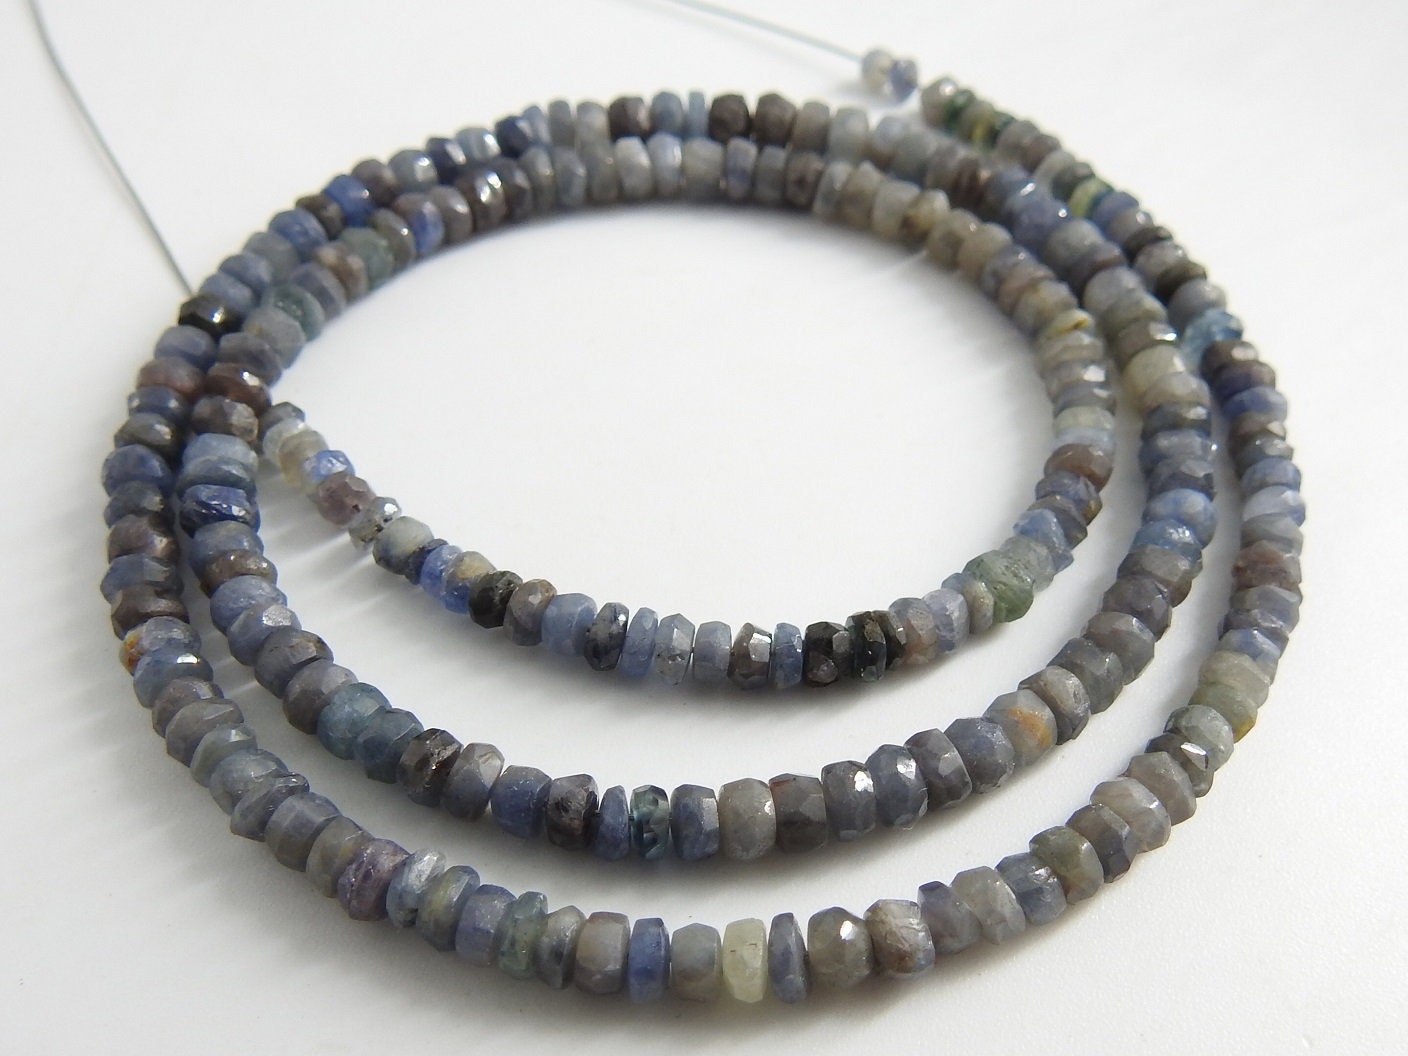 Blue Sapphire Faceted Roundel Bead,Multi Shaded,Burma Mines,Loose Stone,Handmade,For Jewelry Makers,16Inch Strand,100%Natural PMEB-13 | Save 33% - Rajasthan Living 17